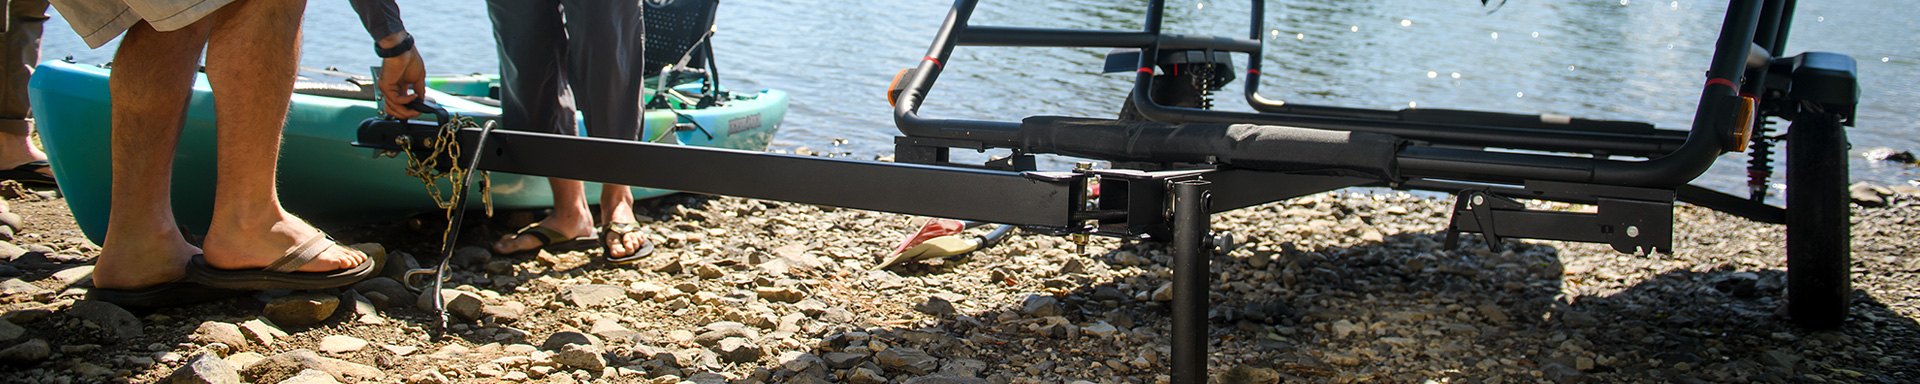 Trailer Upkeep - Parts That Help Load and Unload the Boat